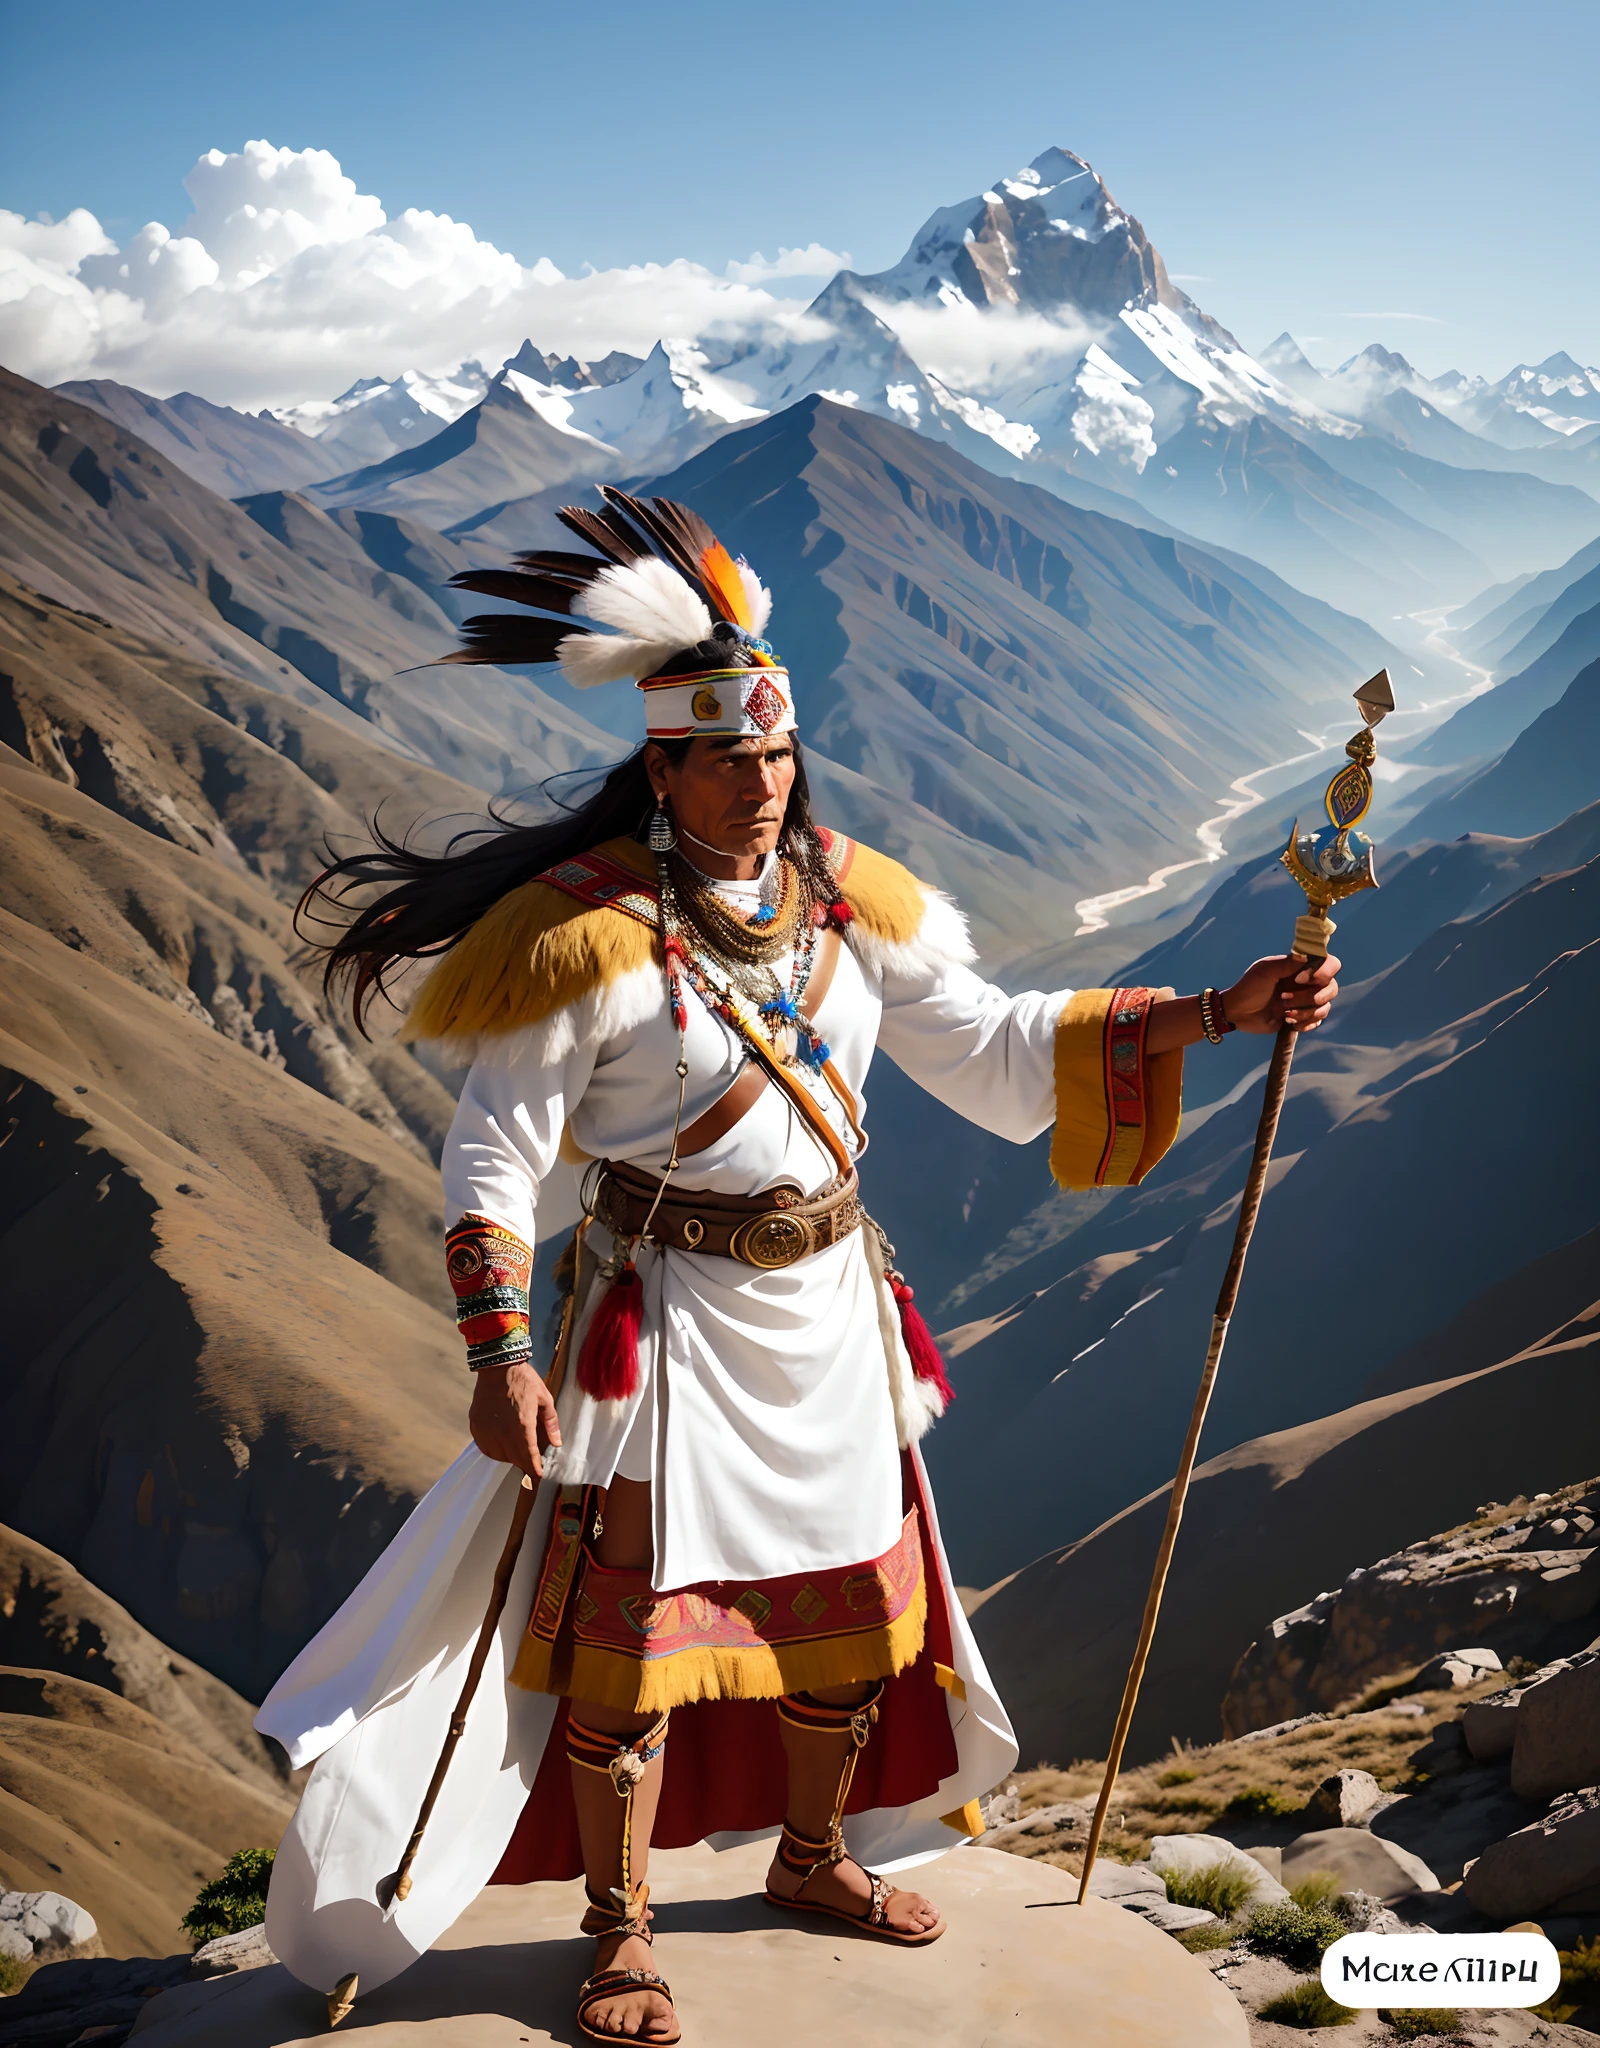 50-year-old indigenous Inca man in white and gold clothing holding a spear and standing on a rock, in the background ice mountains Himalayas Tibet, Indian warrior in shaman clothes, quechua, super verbose, 8K, hyper realism,